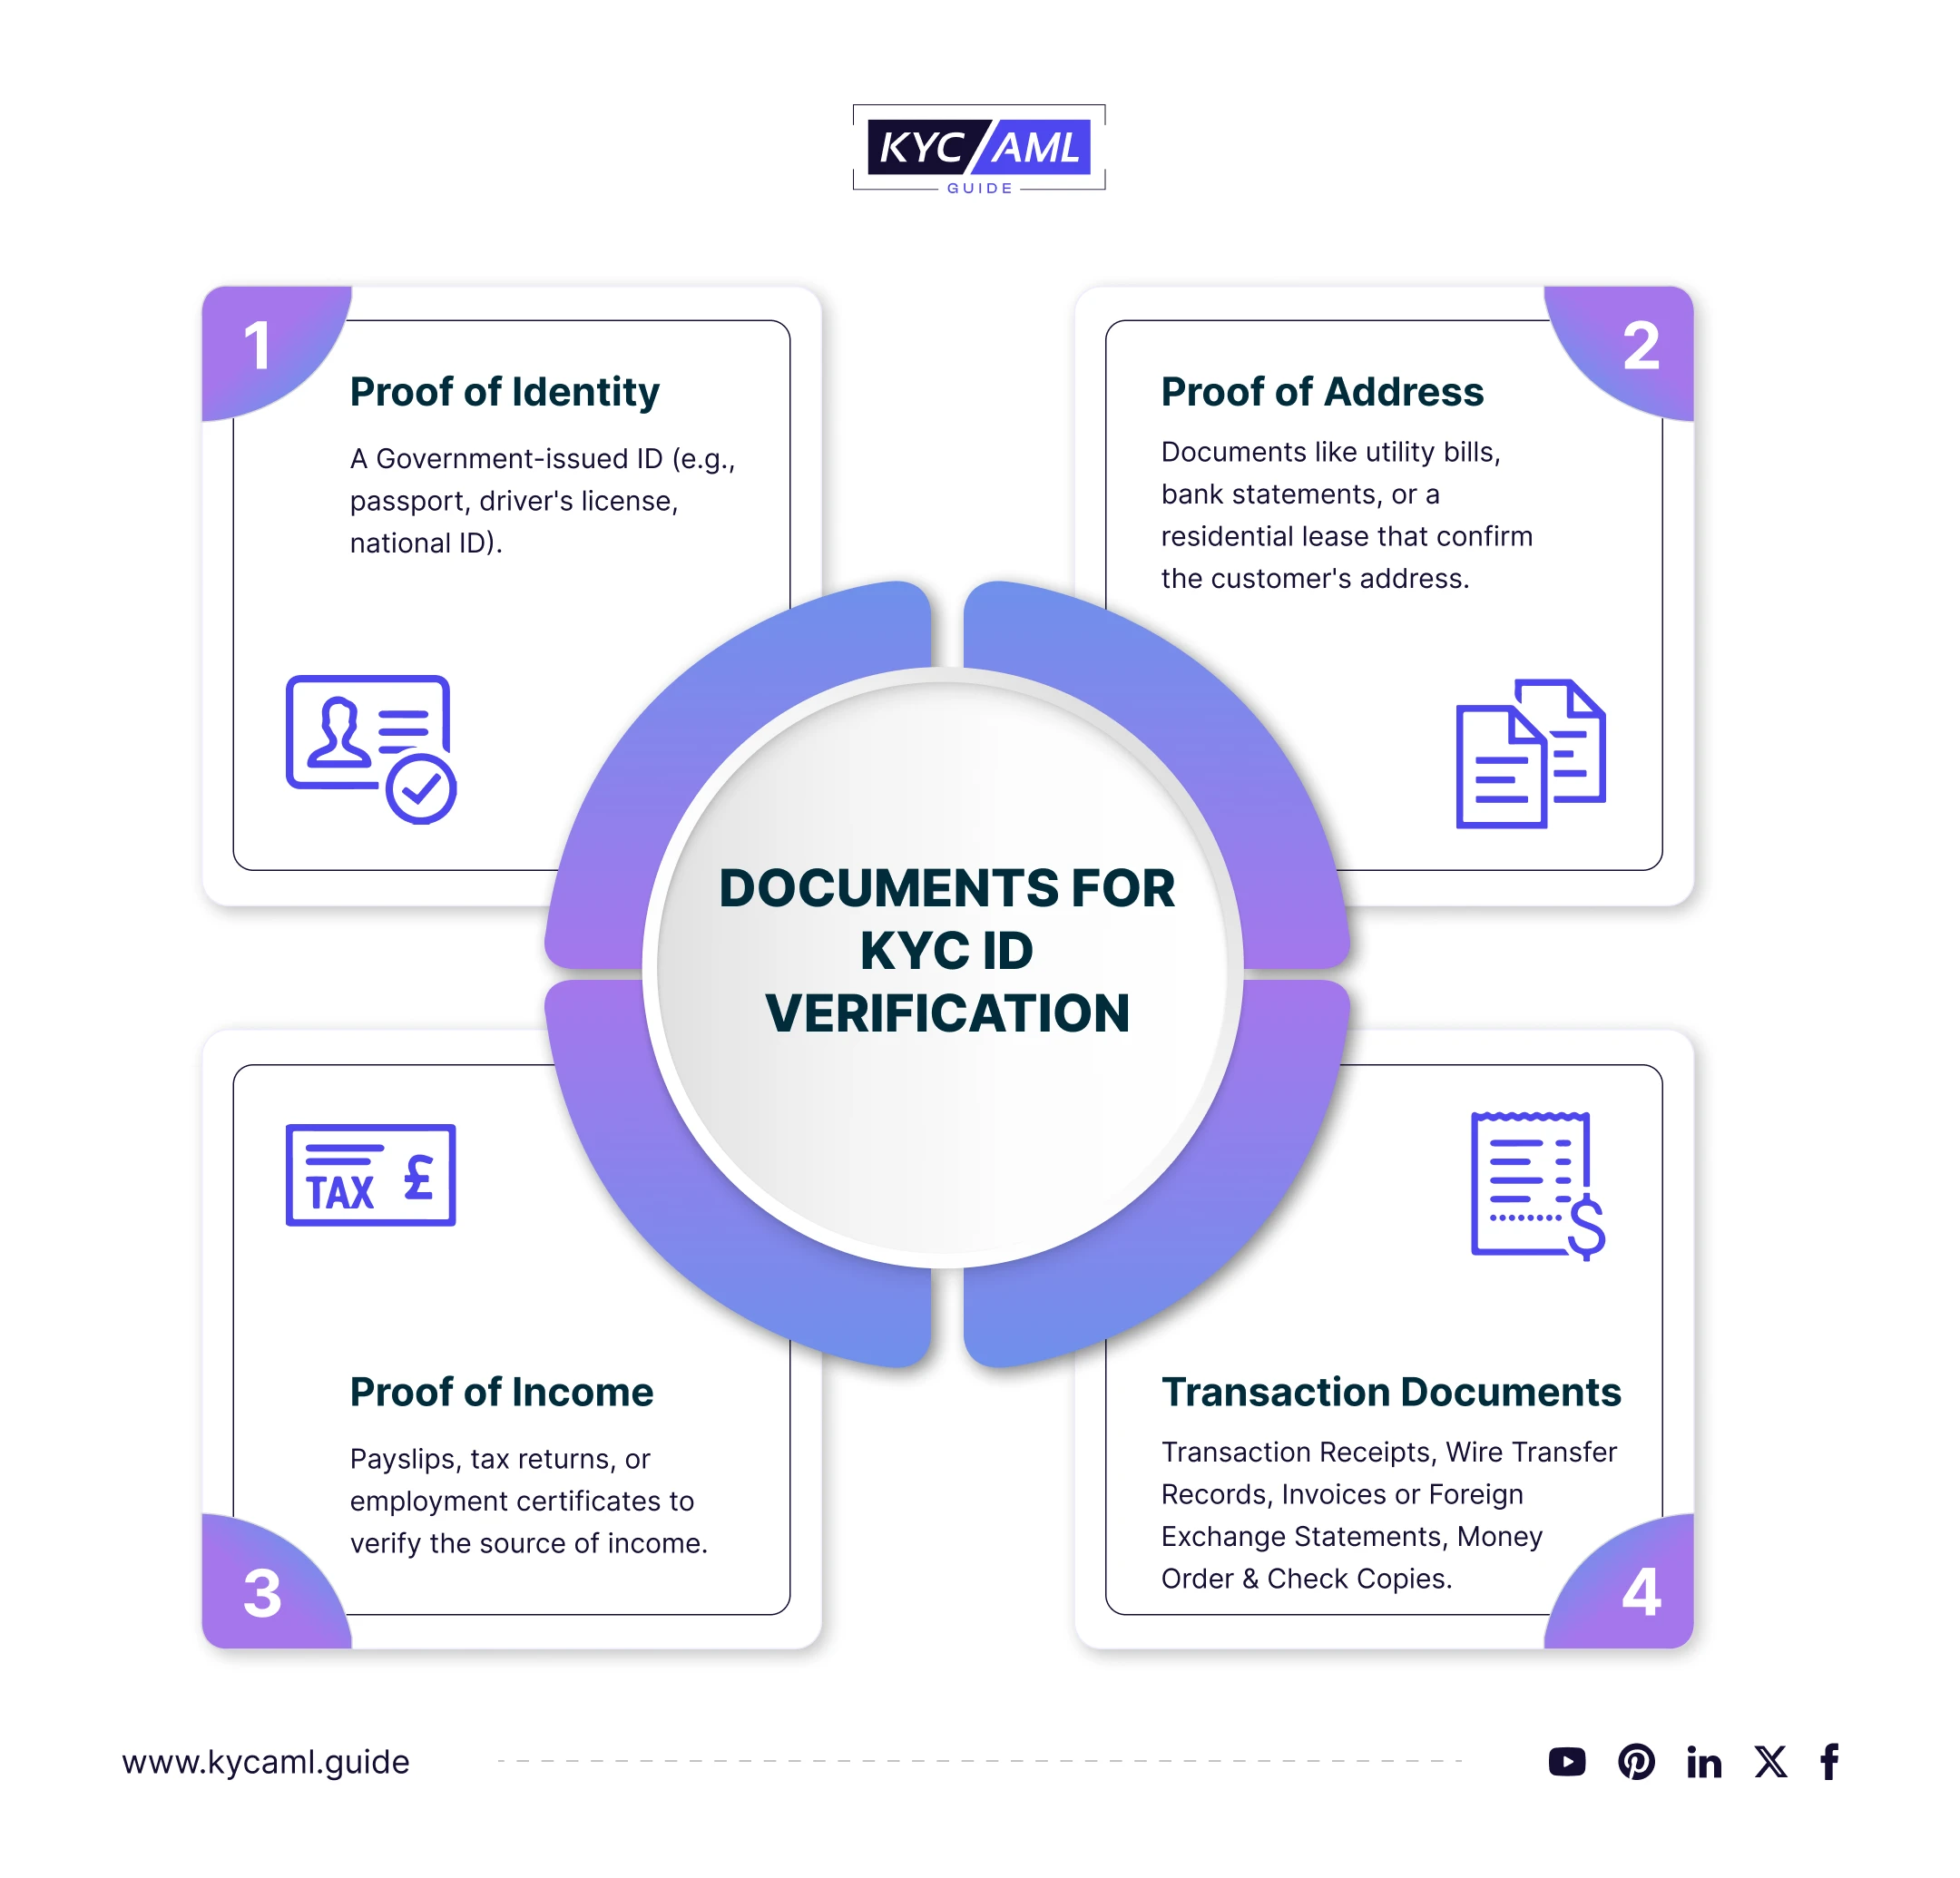 This chart depicts the major documents required for KYC Identity Verification including Proof of Identity, Proof of Address, Proof of Income, and Transaction Documents.